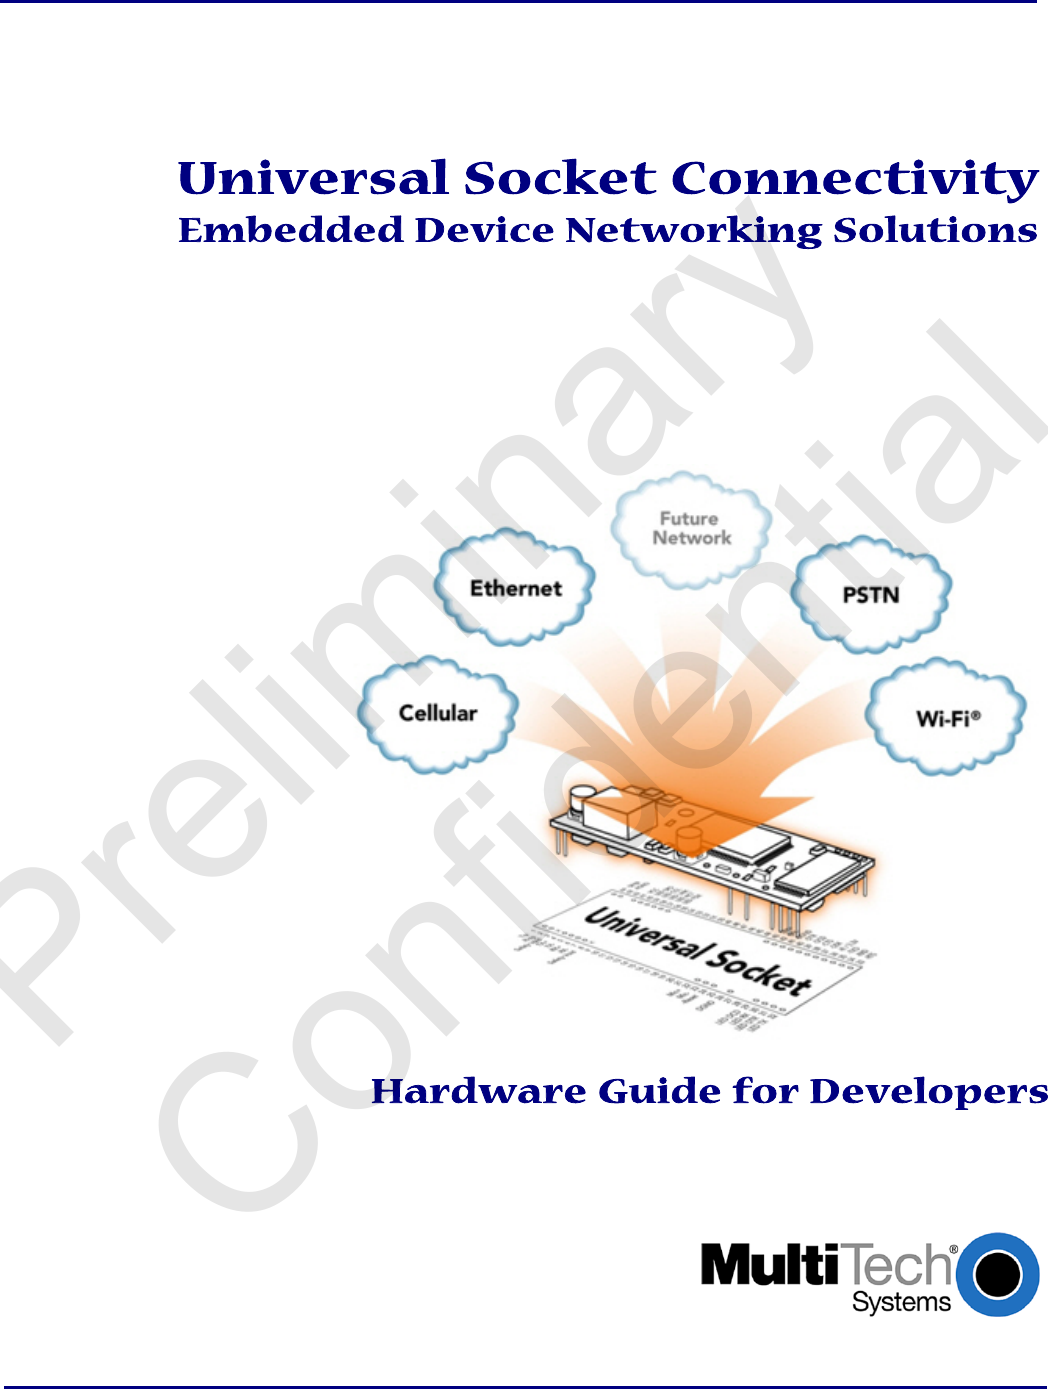              Universal Socket Connectivity   Embedded Device Networking Solutions            Hardware Guide for Developers       Preliminary  Confidential